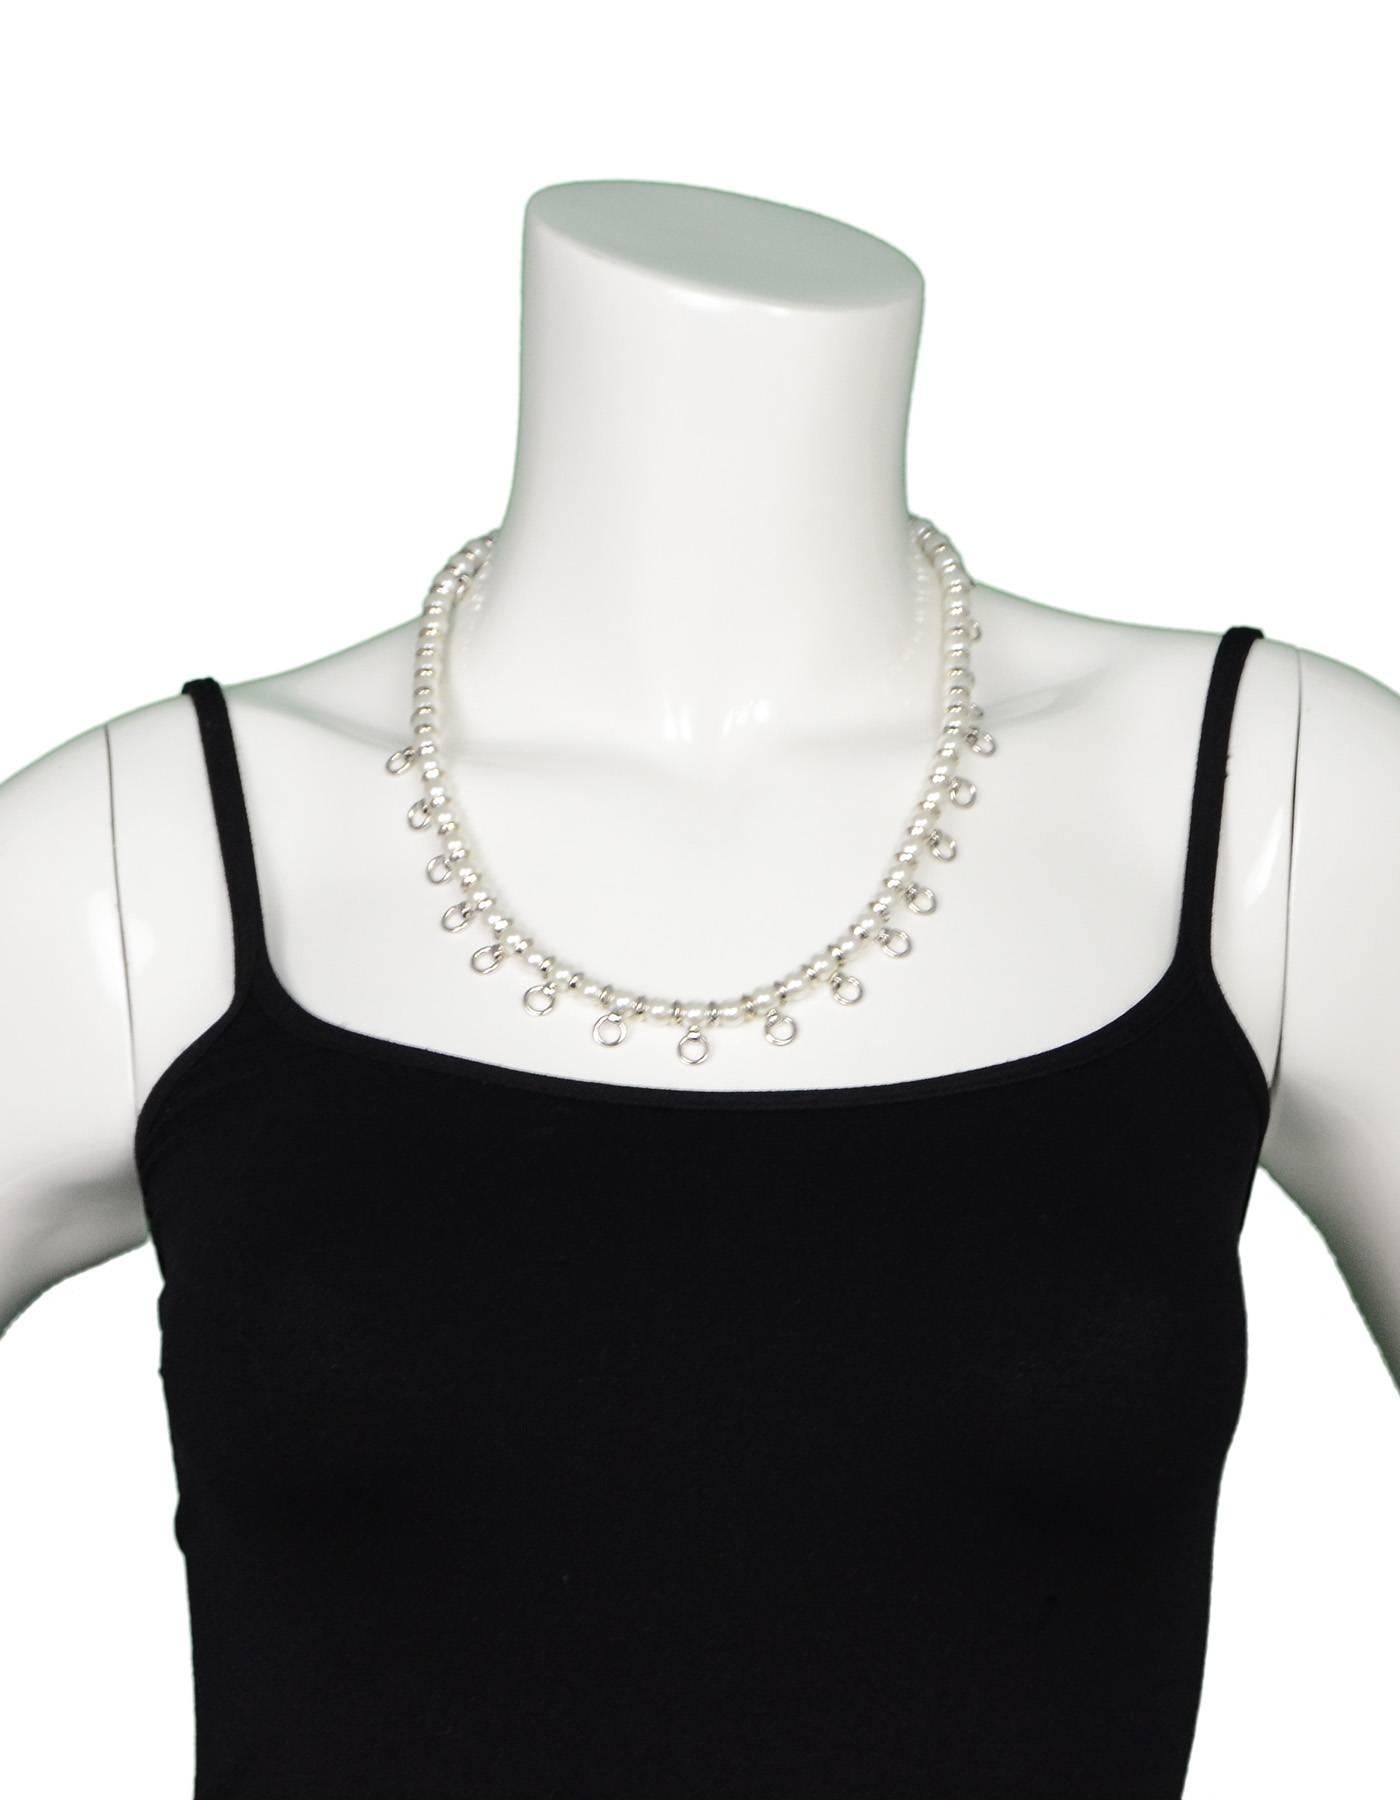 Eddie Borgo Pierced Faux Pearl Long Necklace

Color: White and silvertone
Materials: Metal and fauxx pearl
Closure: Push clasp
Stamp: Eddie Borgo
Retail Price: $435 + tax
Overall Condition: Excellent pre-owned condition 

Measurements: 
Length: